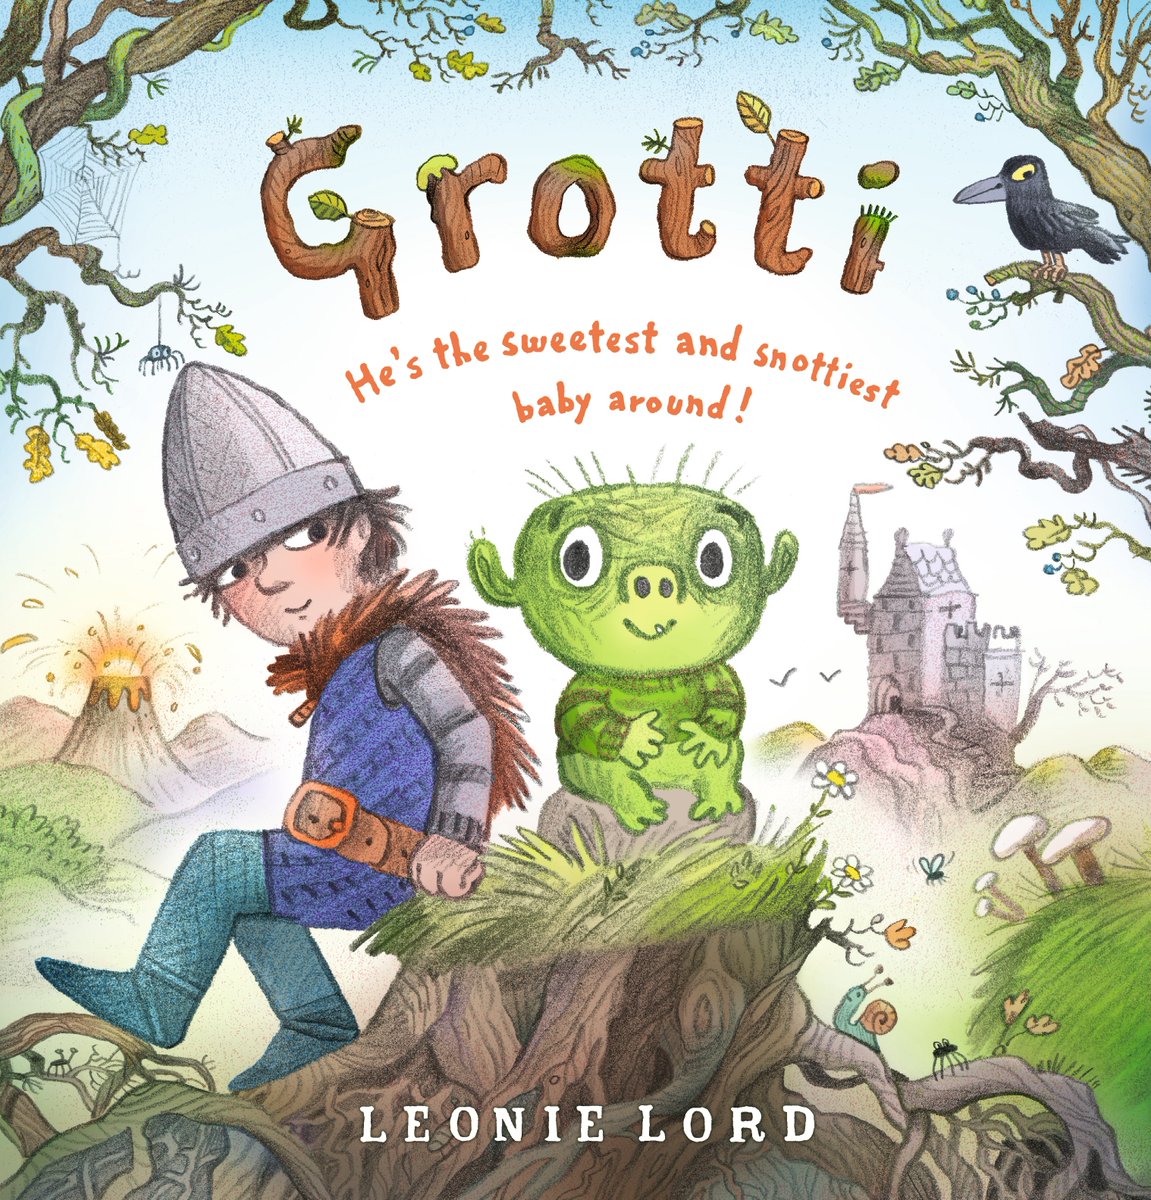 How can anyone resist sweet, snotty Grotti? Wishing this green wee fella and the marvellous @LeonieLord a very happy publication day 🌻 Set in a world of castles, dragons and volcanos, a young knight meets something green – something grotti – in the woods who changes his life.